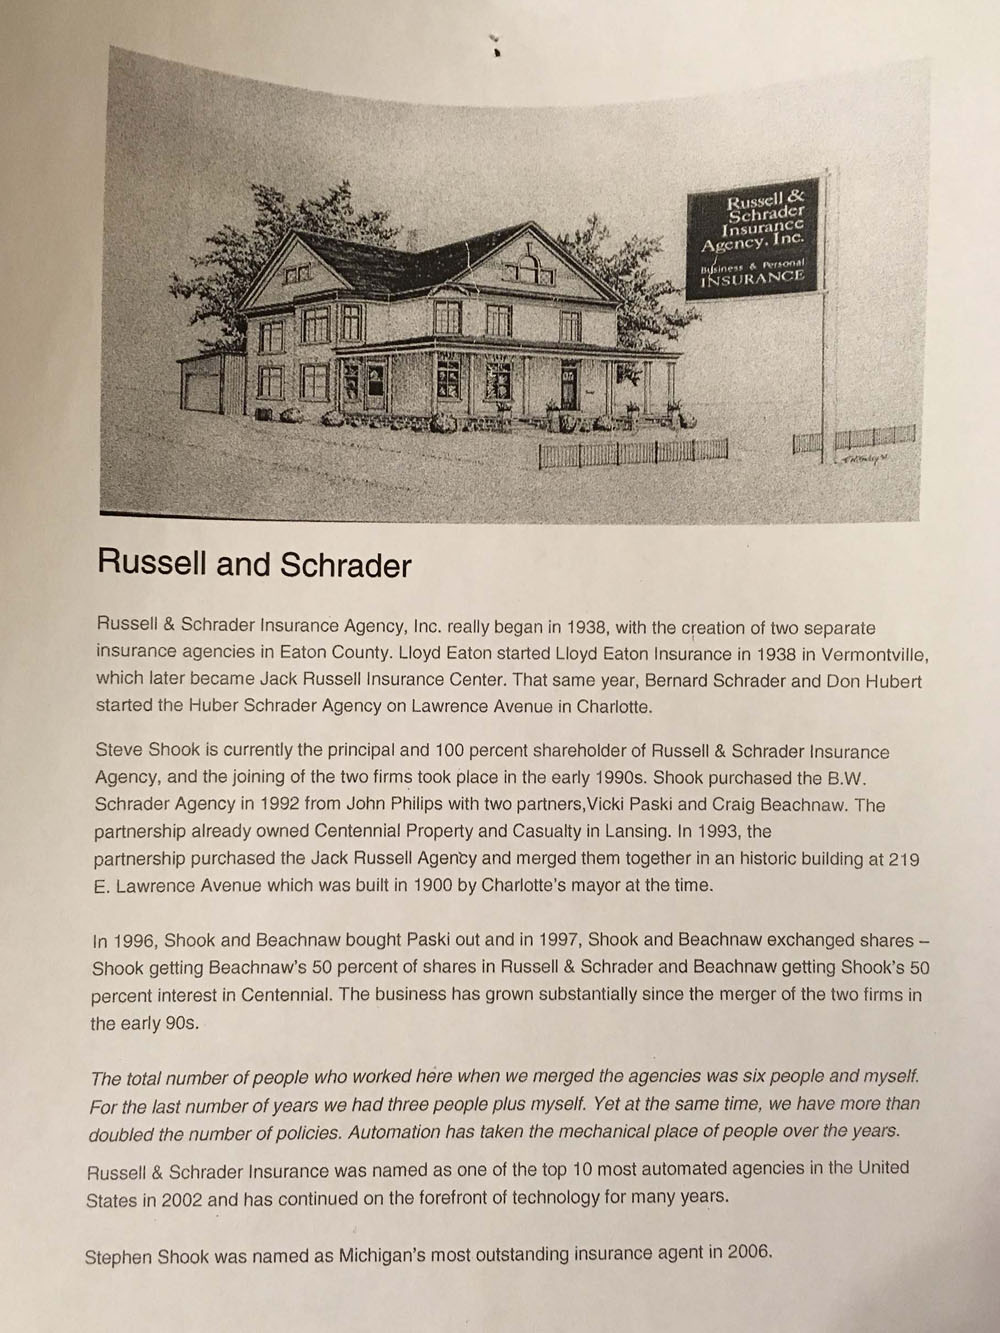 Our History - Illustration of Russell & Schrader Insurance Office Building with Description About the Agency and History